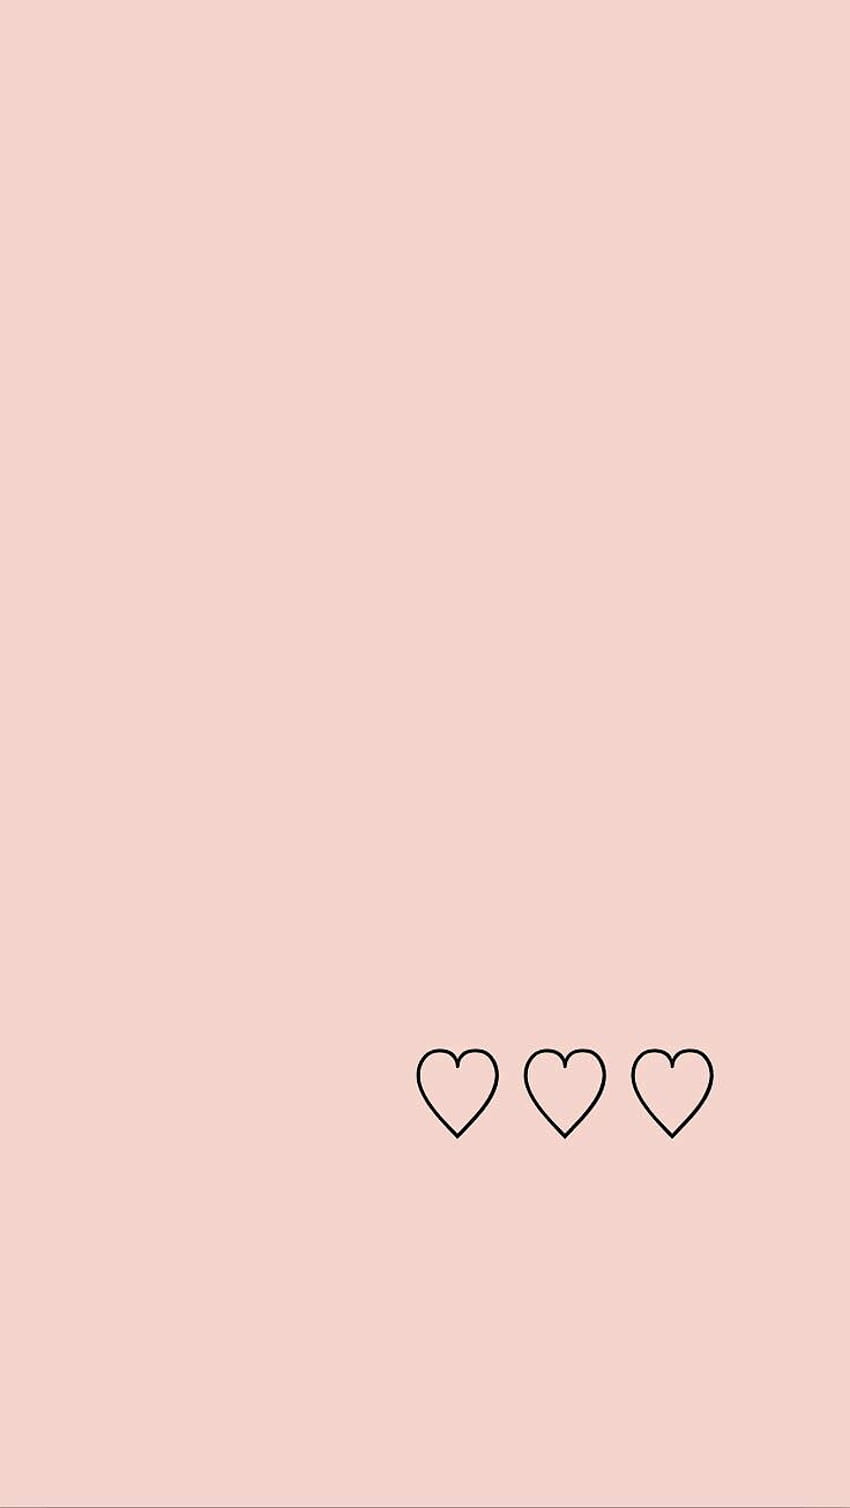 hearts cute sparkles heart pretty aesthetic pink  Heart Wallpapers  Aesthetic HD Png Download  Transparent Png Image  PNGitem